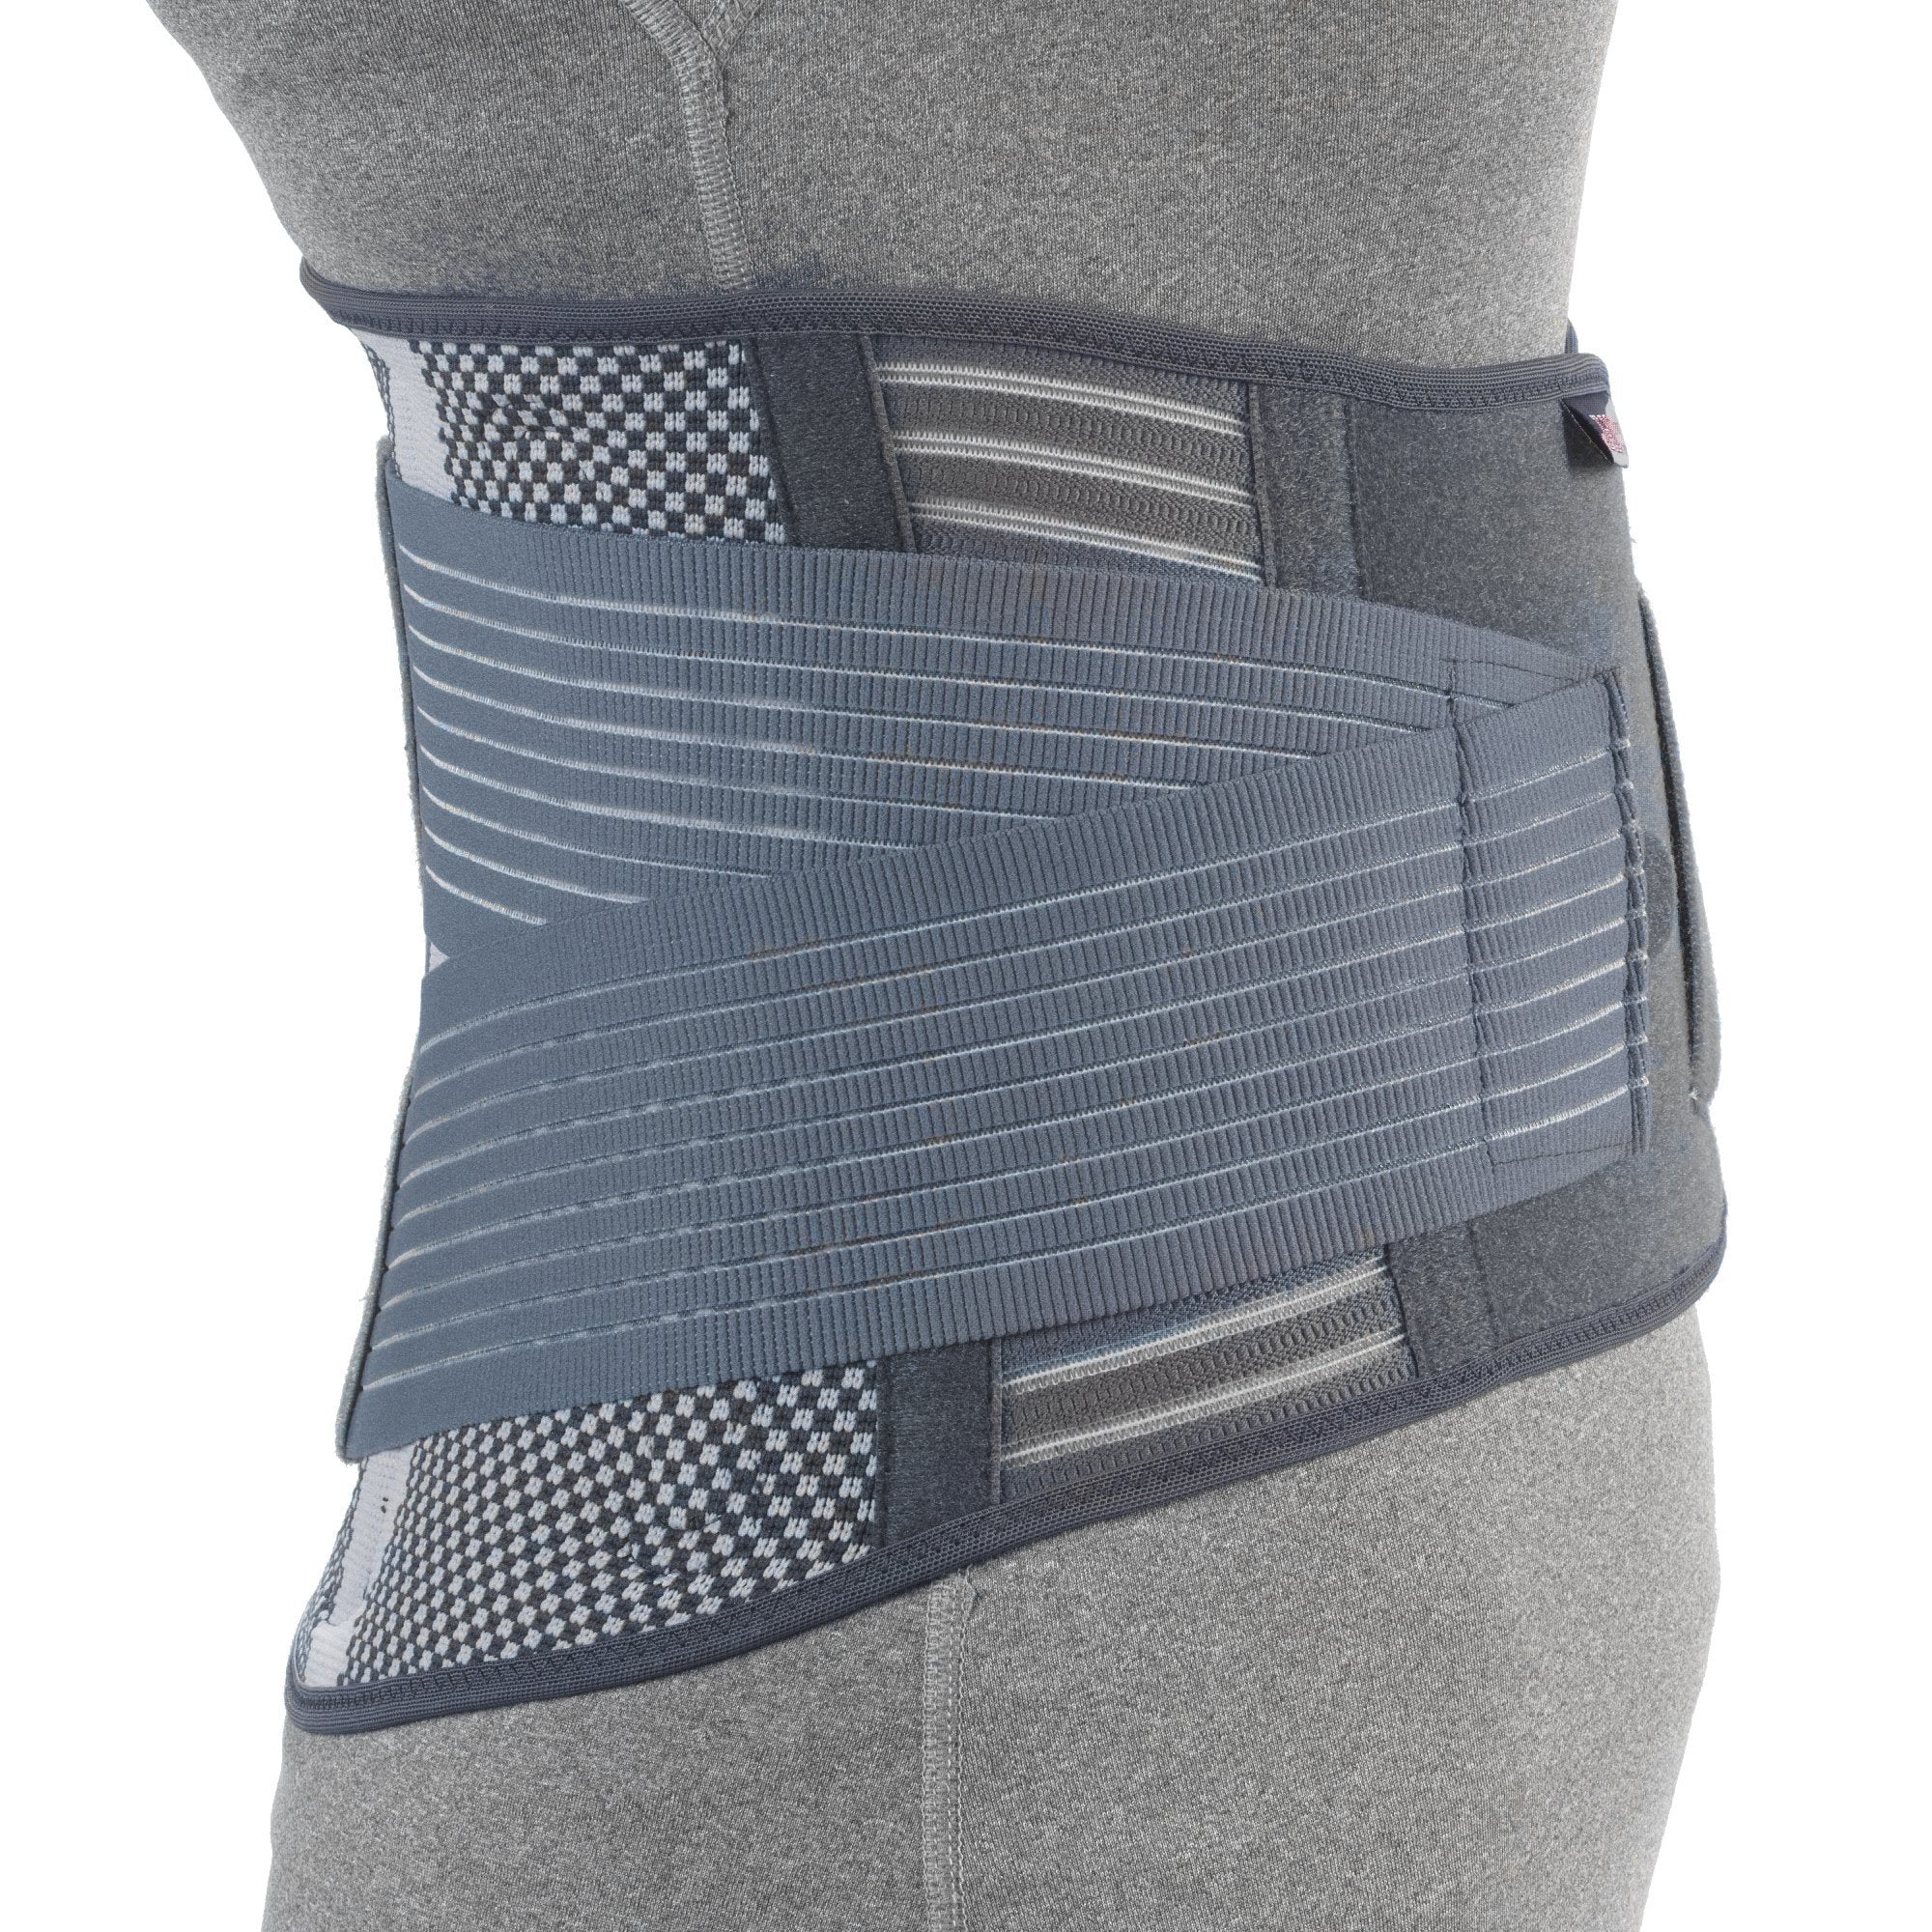 Airway THERATEX Lumbosacral Support